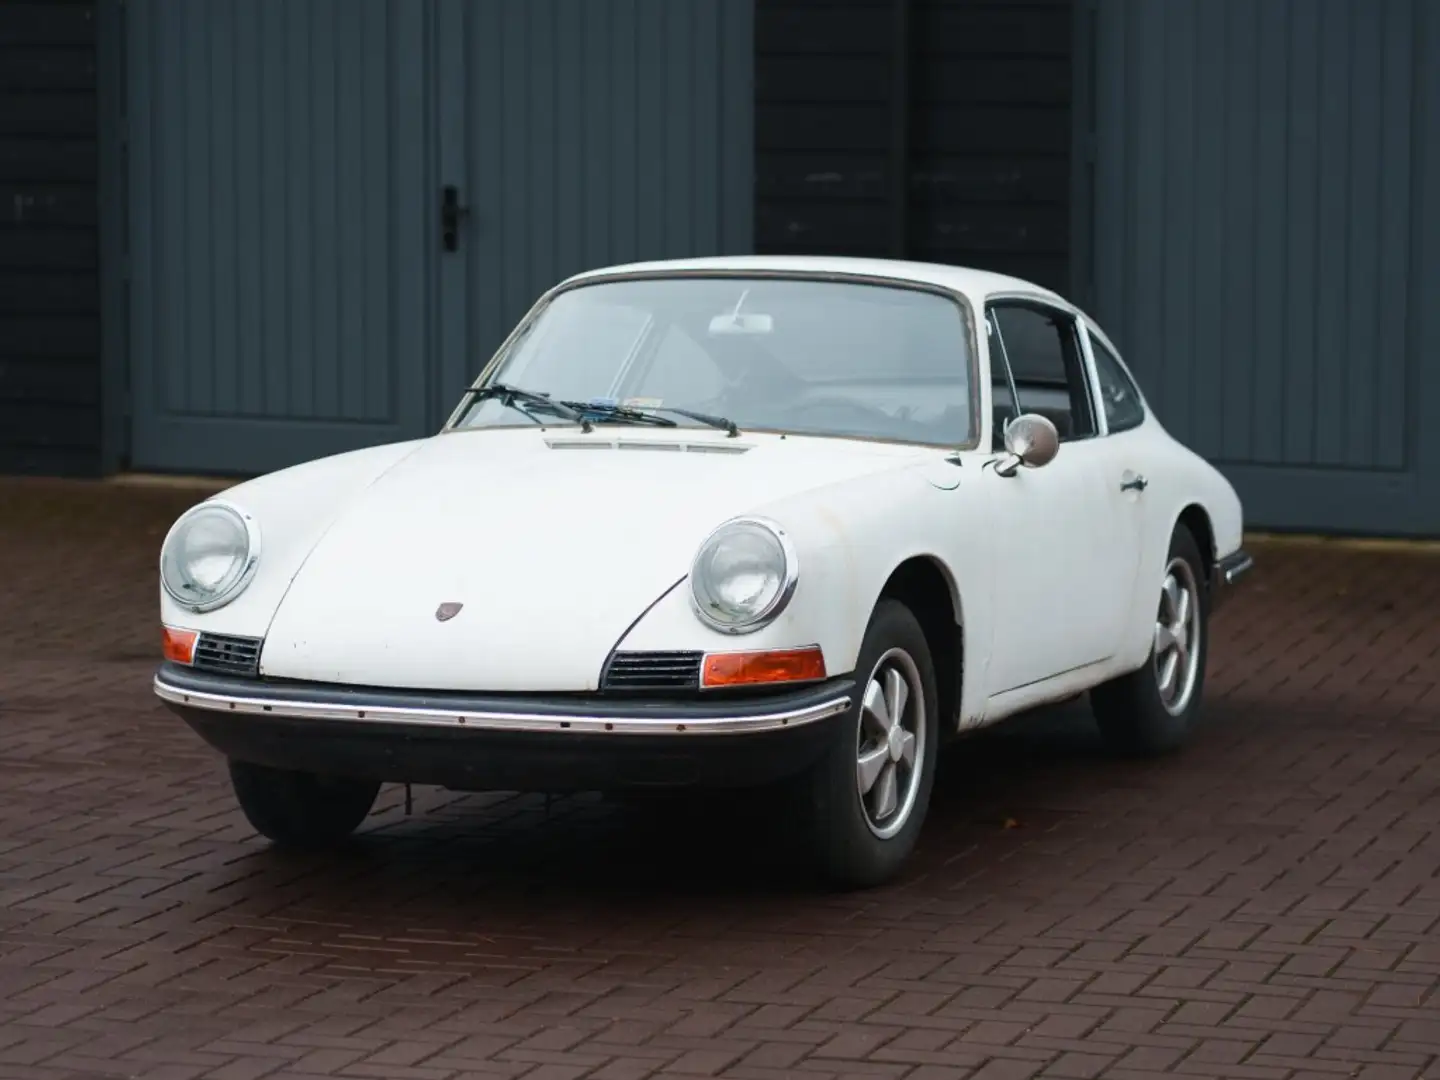 Porsche 912 Coupe late 1965 early 66 model Wit - 1